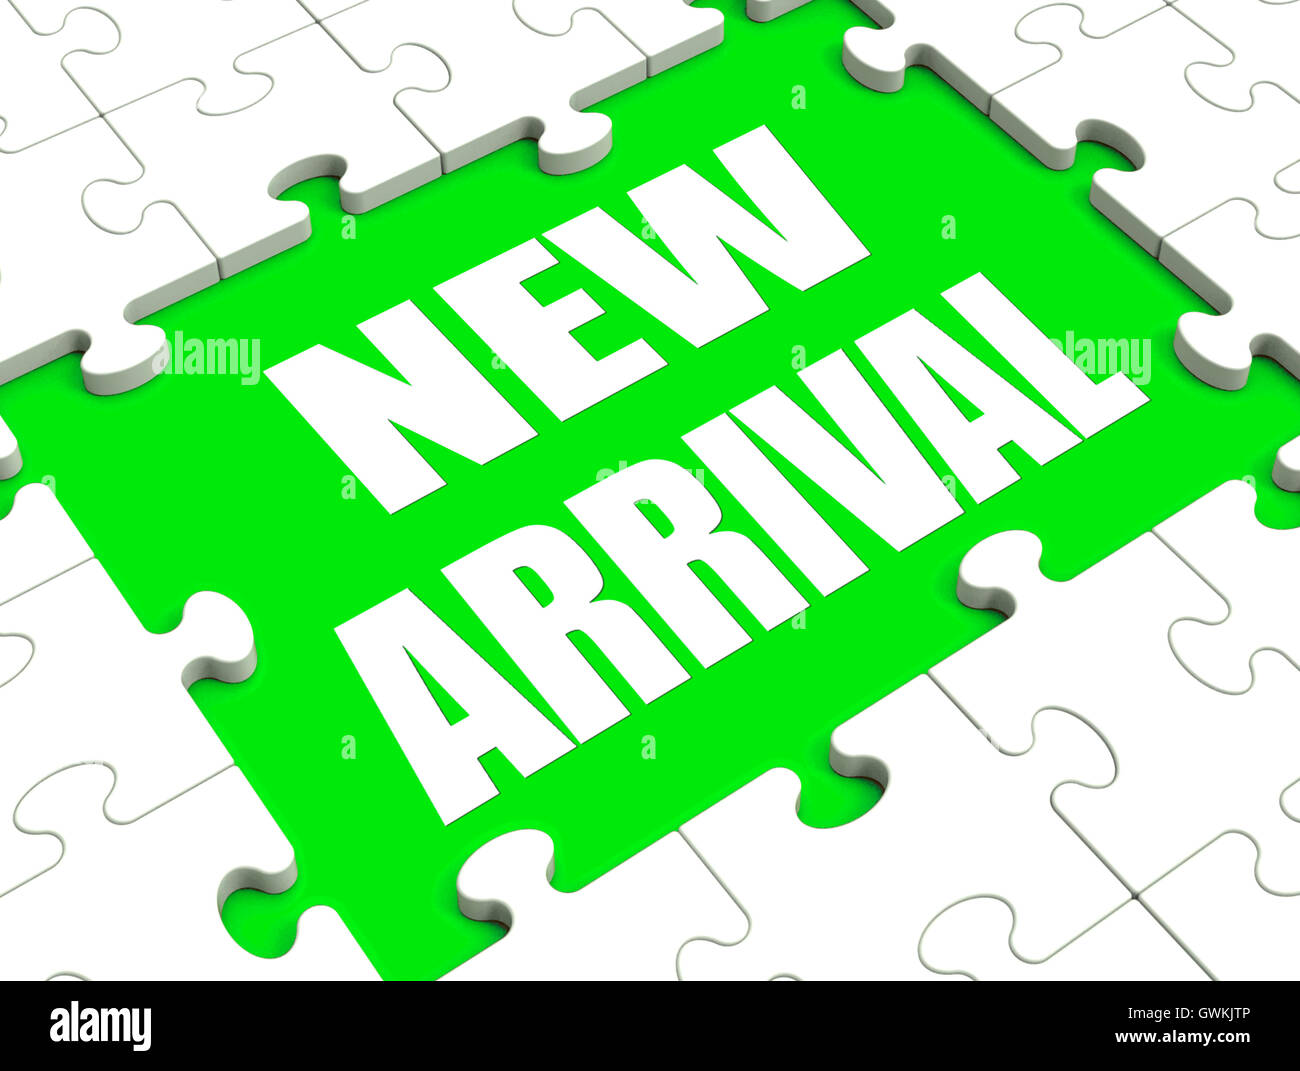 New Arrival Puzzle Shows Latest Products Announcement Arriving Stock Photo